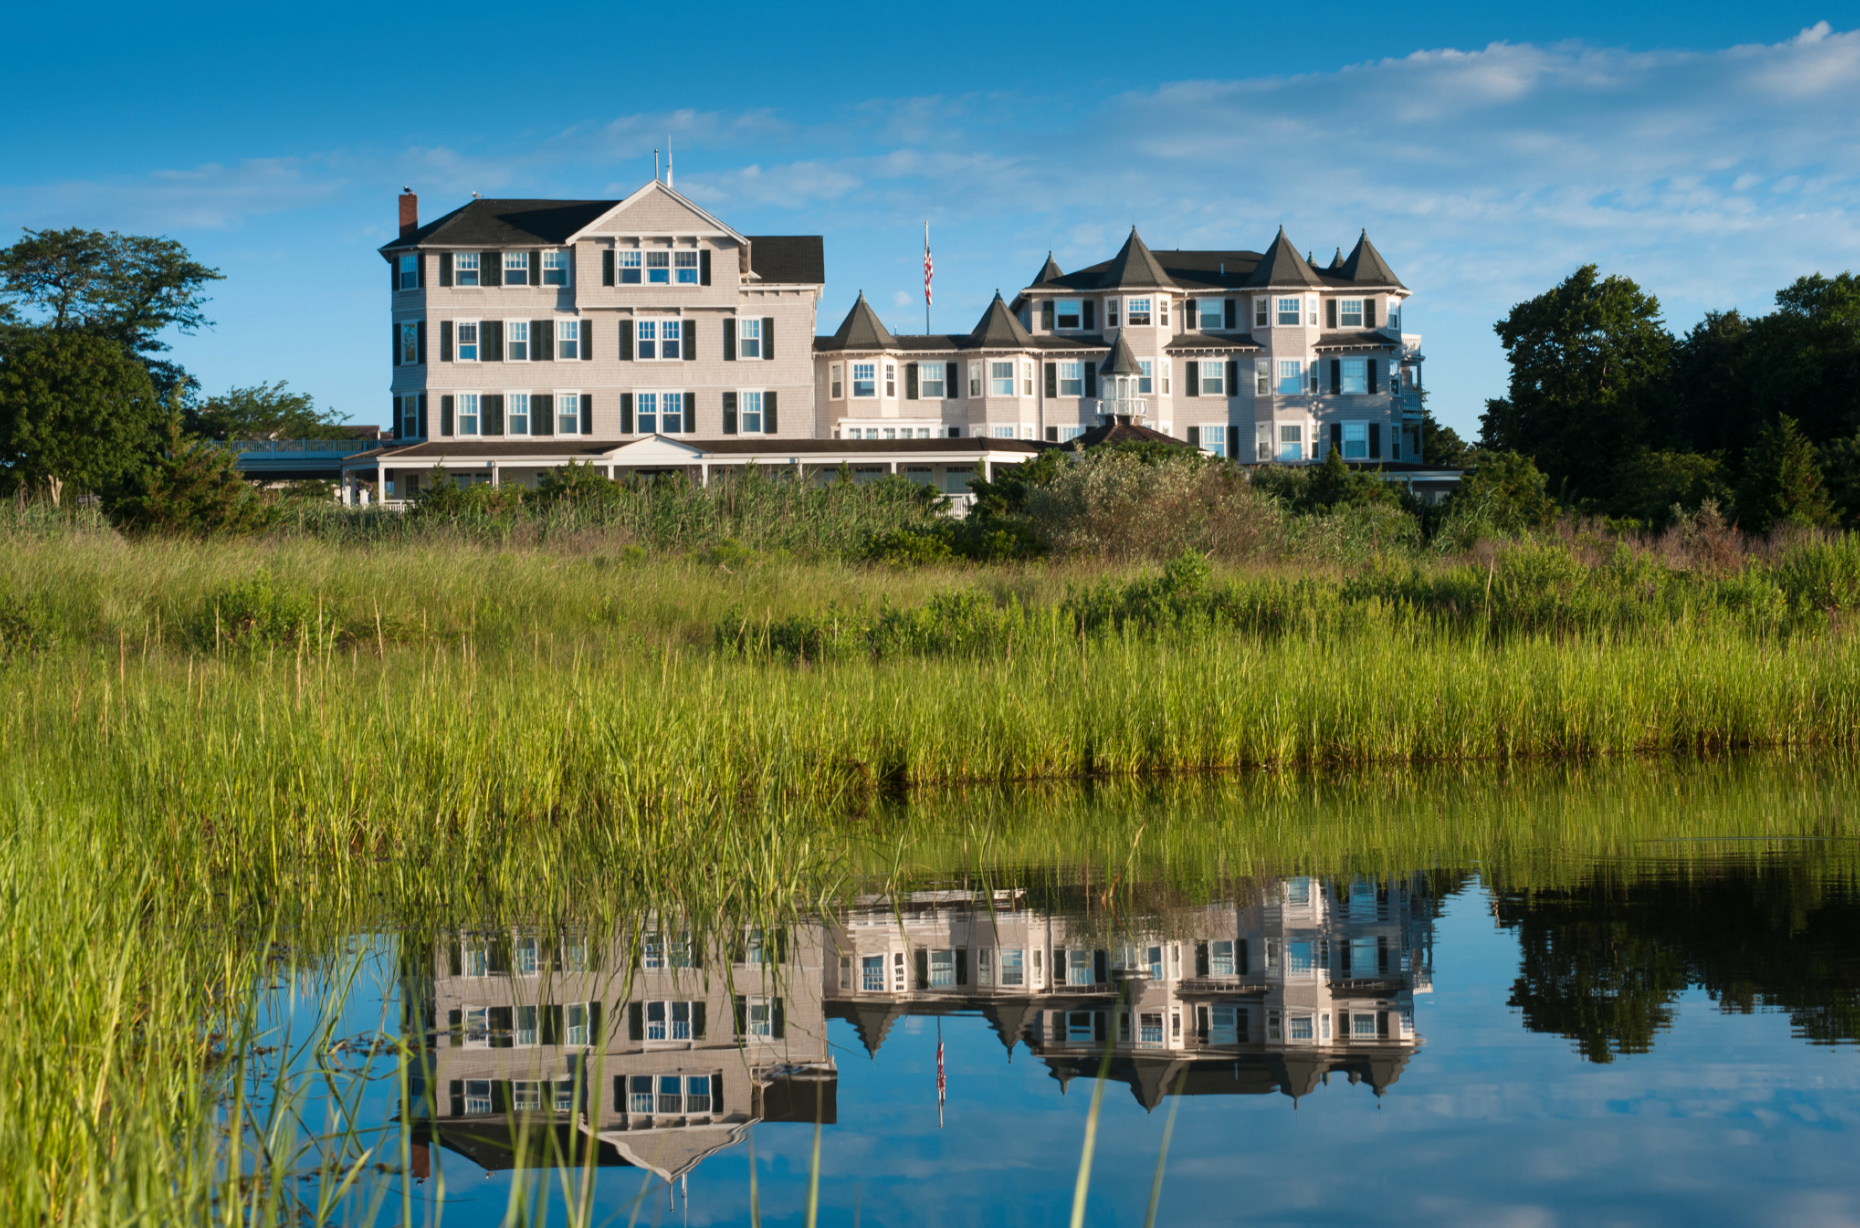 We Found Our Low-Key Mini Moon Bliss — And Some History — In This Martha’s Vineyard Town